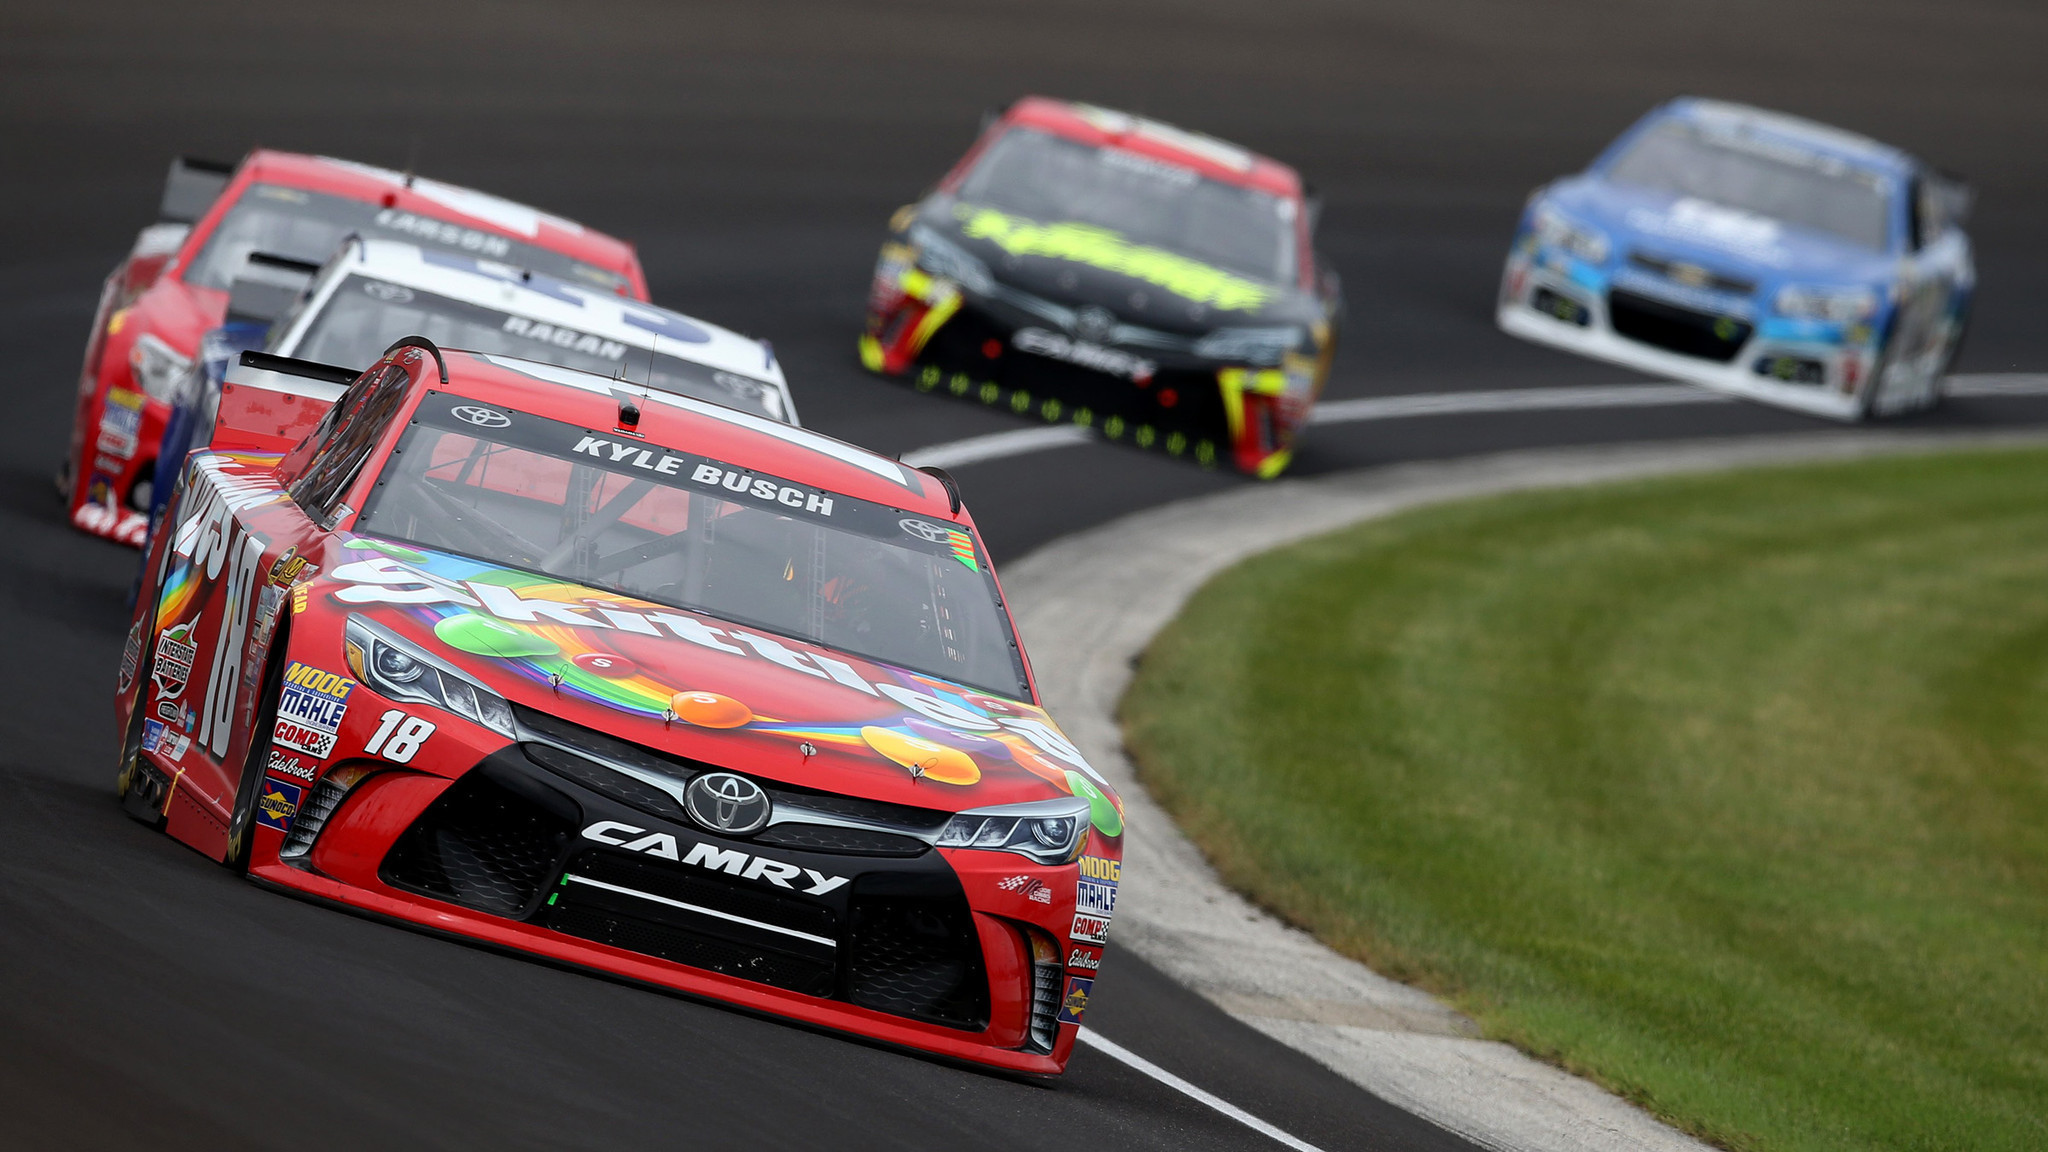 2048x1152 Kyle Busch wins the Brickyard 400 to complete weekend sweep at Indy - LA  Times